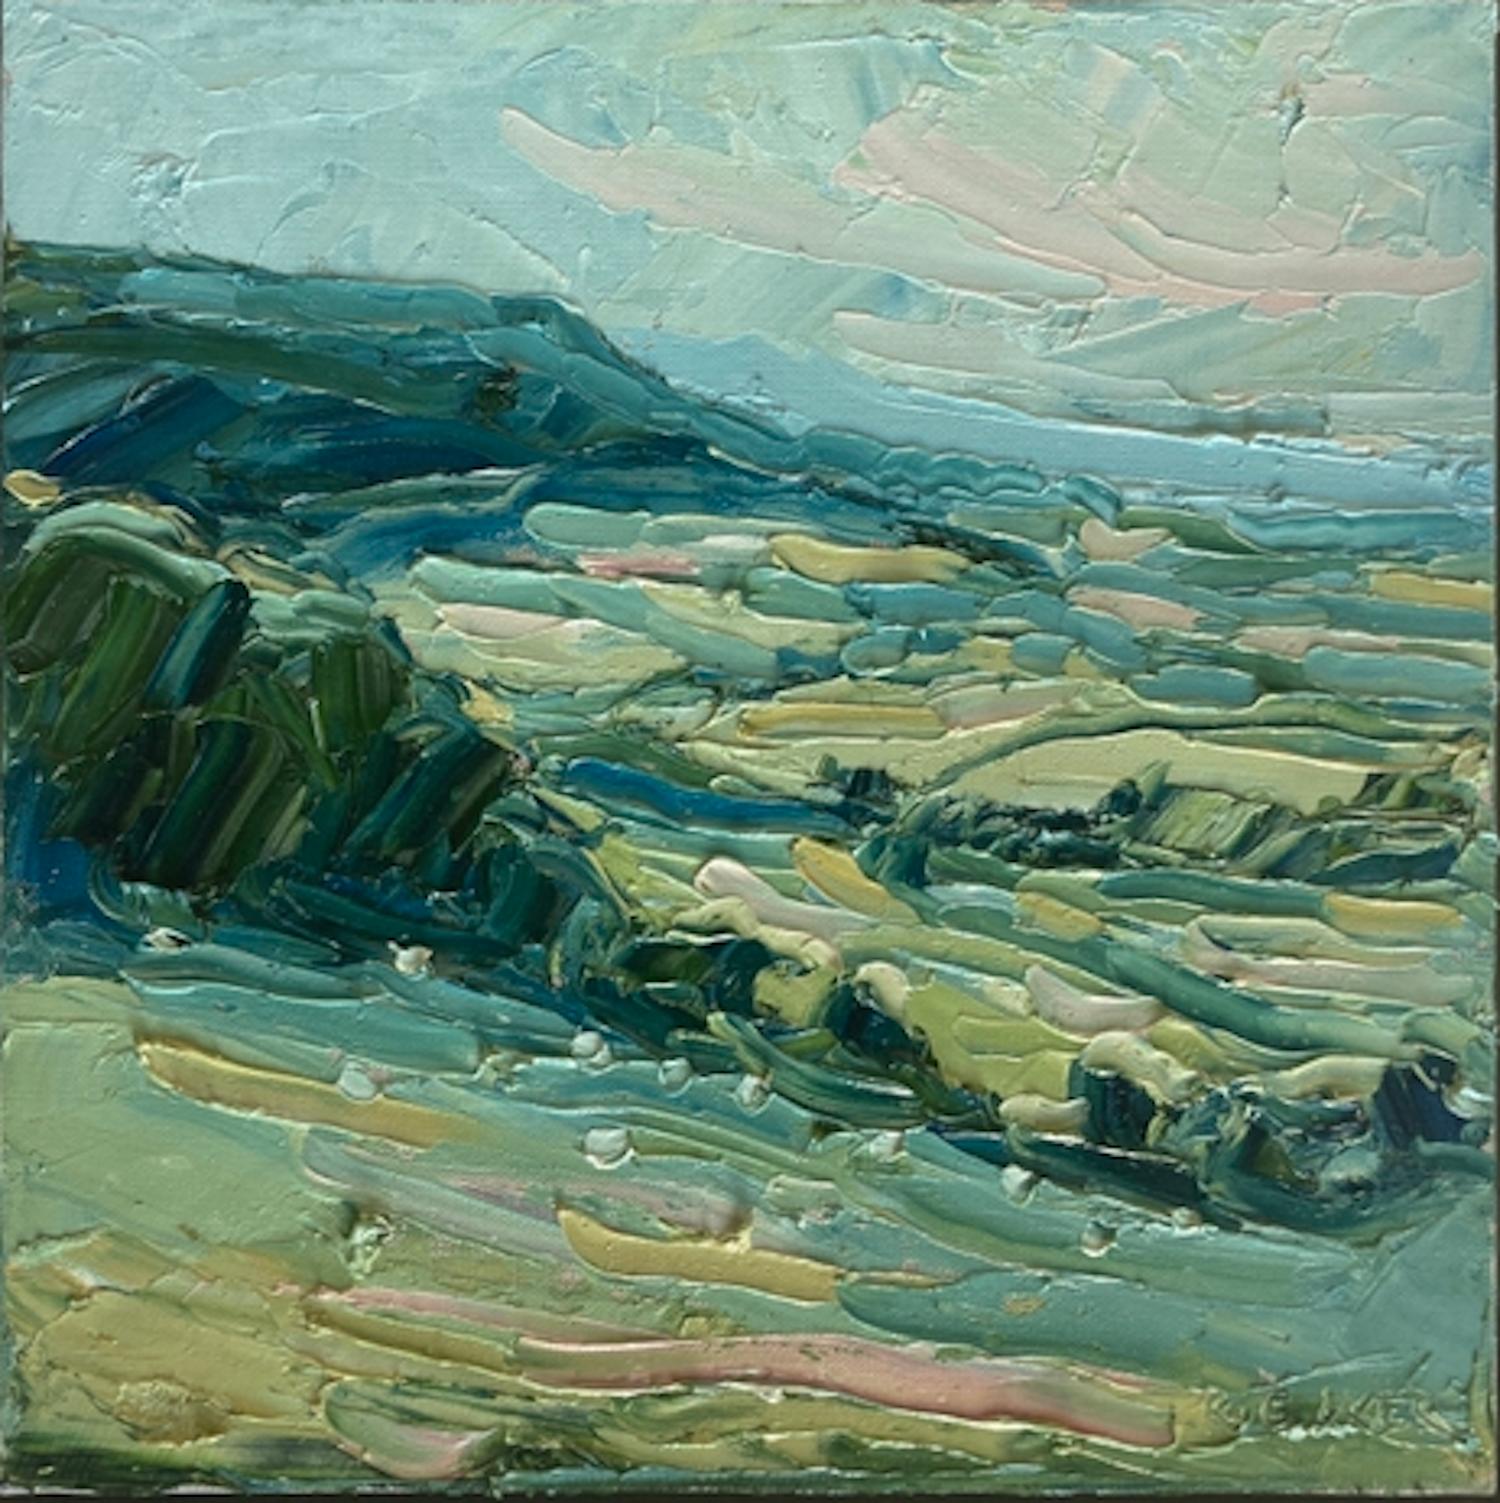 Stinchcombe Hill by Rupert Aker [2022]

original
Oil on board
Image size: H:30 cm x W:30 cm
Complete Size of Unframed Work: H:30 cm x W:30 cm x D:2cm
Frame Size: H:33 cm x W:33 cm x D:3cm
Sold Framed
Please note that insitu images are purely an